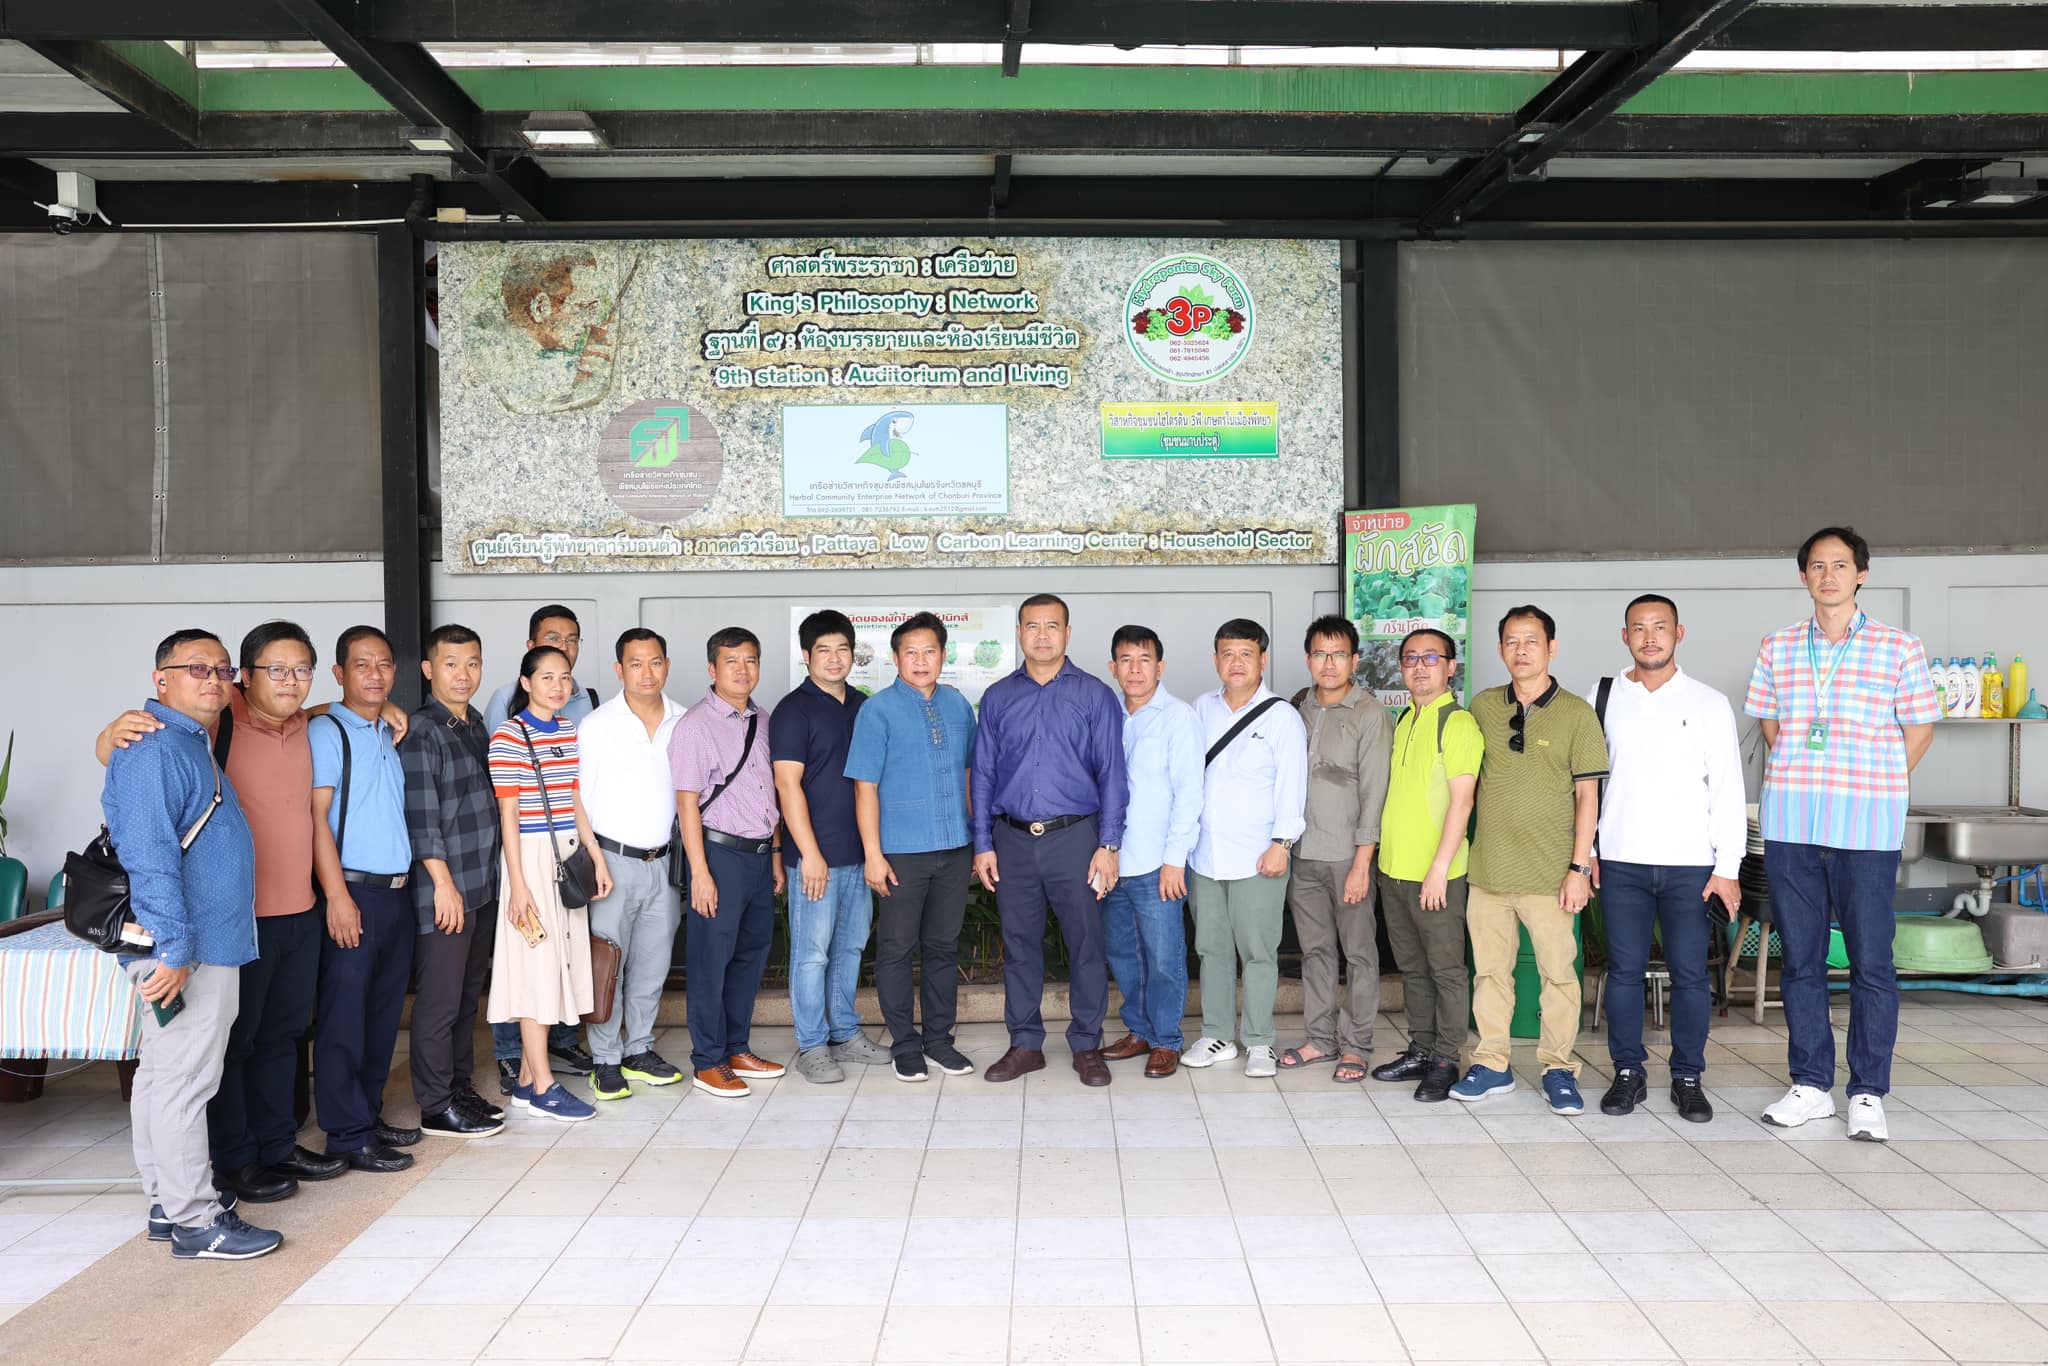 H.E. Dr. KAO Thach, has continued leading ARDB colleagues to visit the Hydroponic in Chonburi Province, Thailand